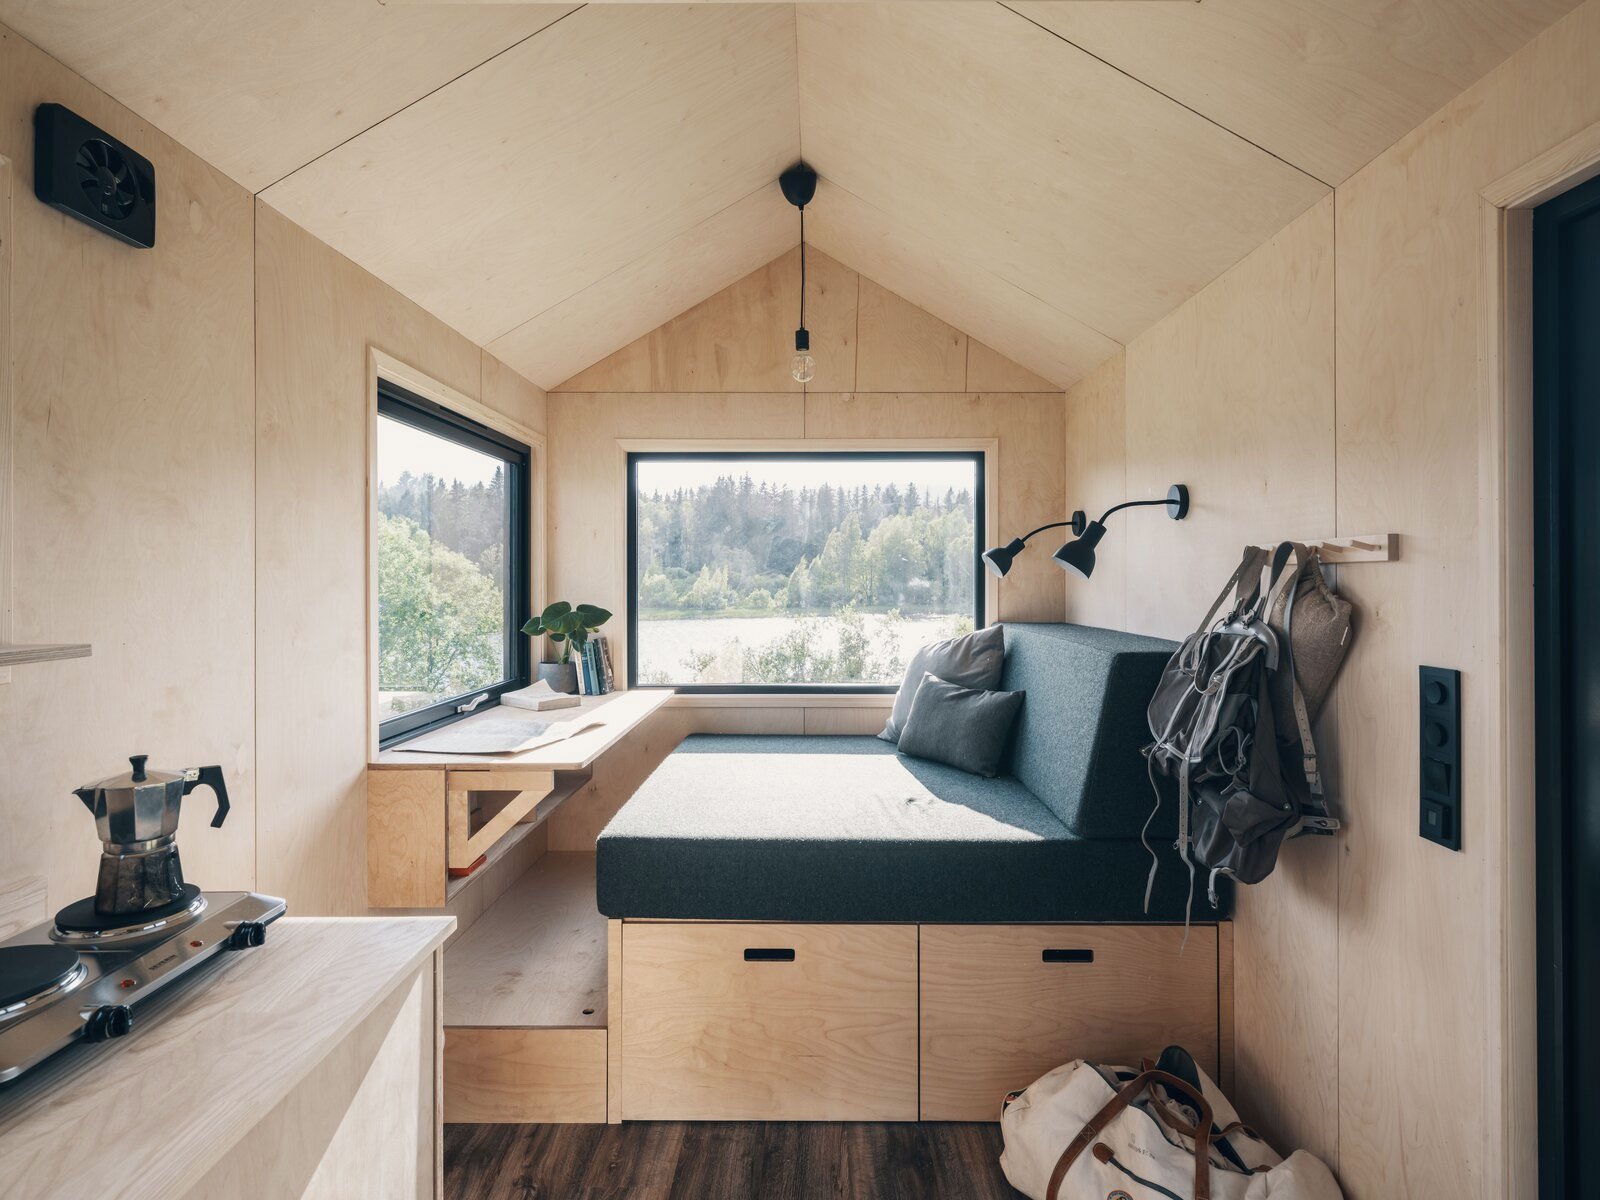 Norske Mikrohus channels Nordic minimalism into tiny home form